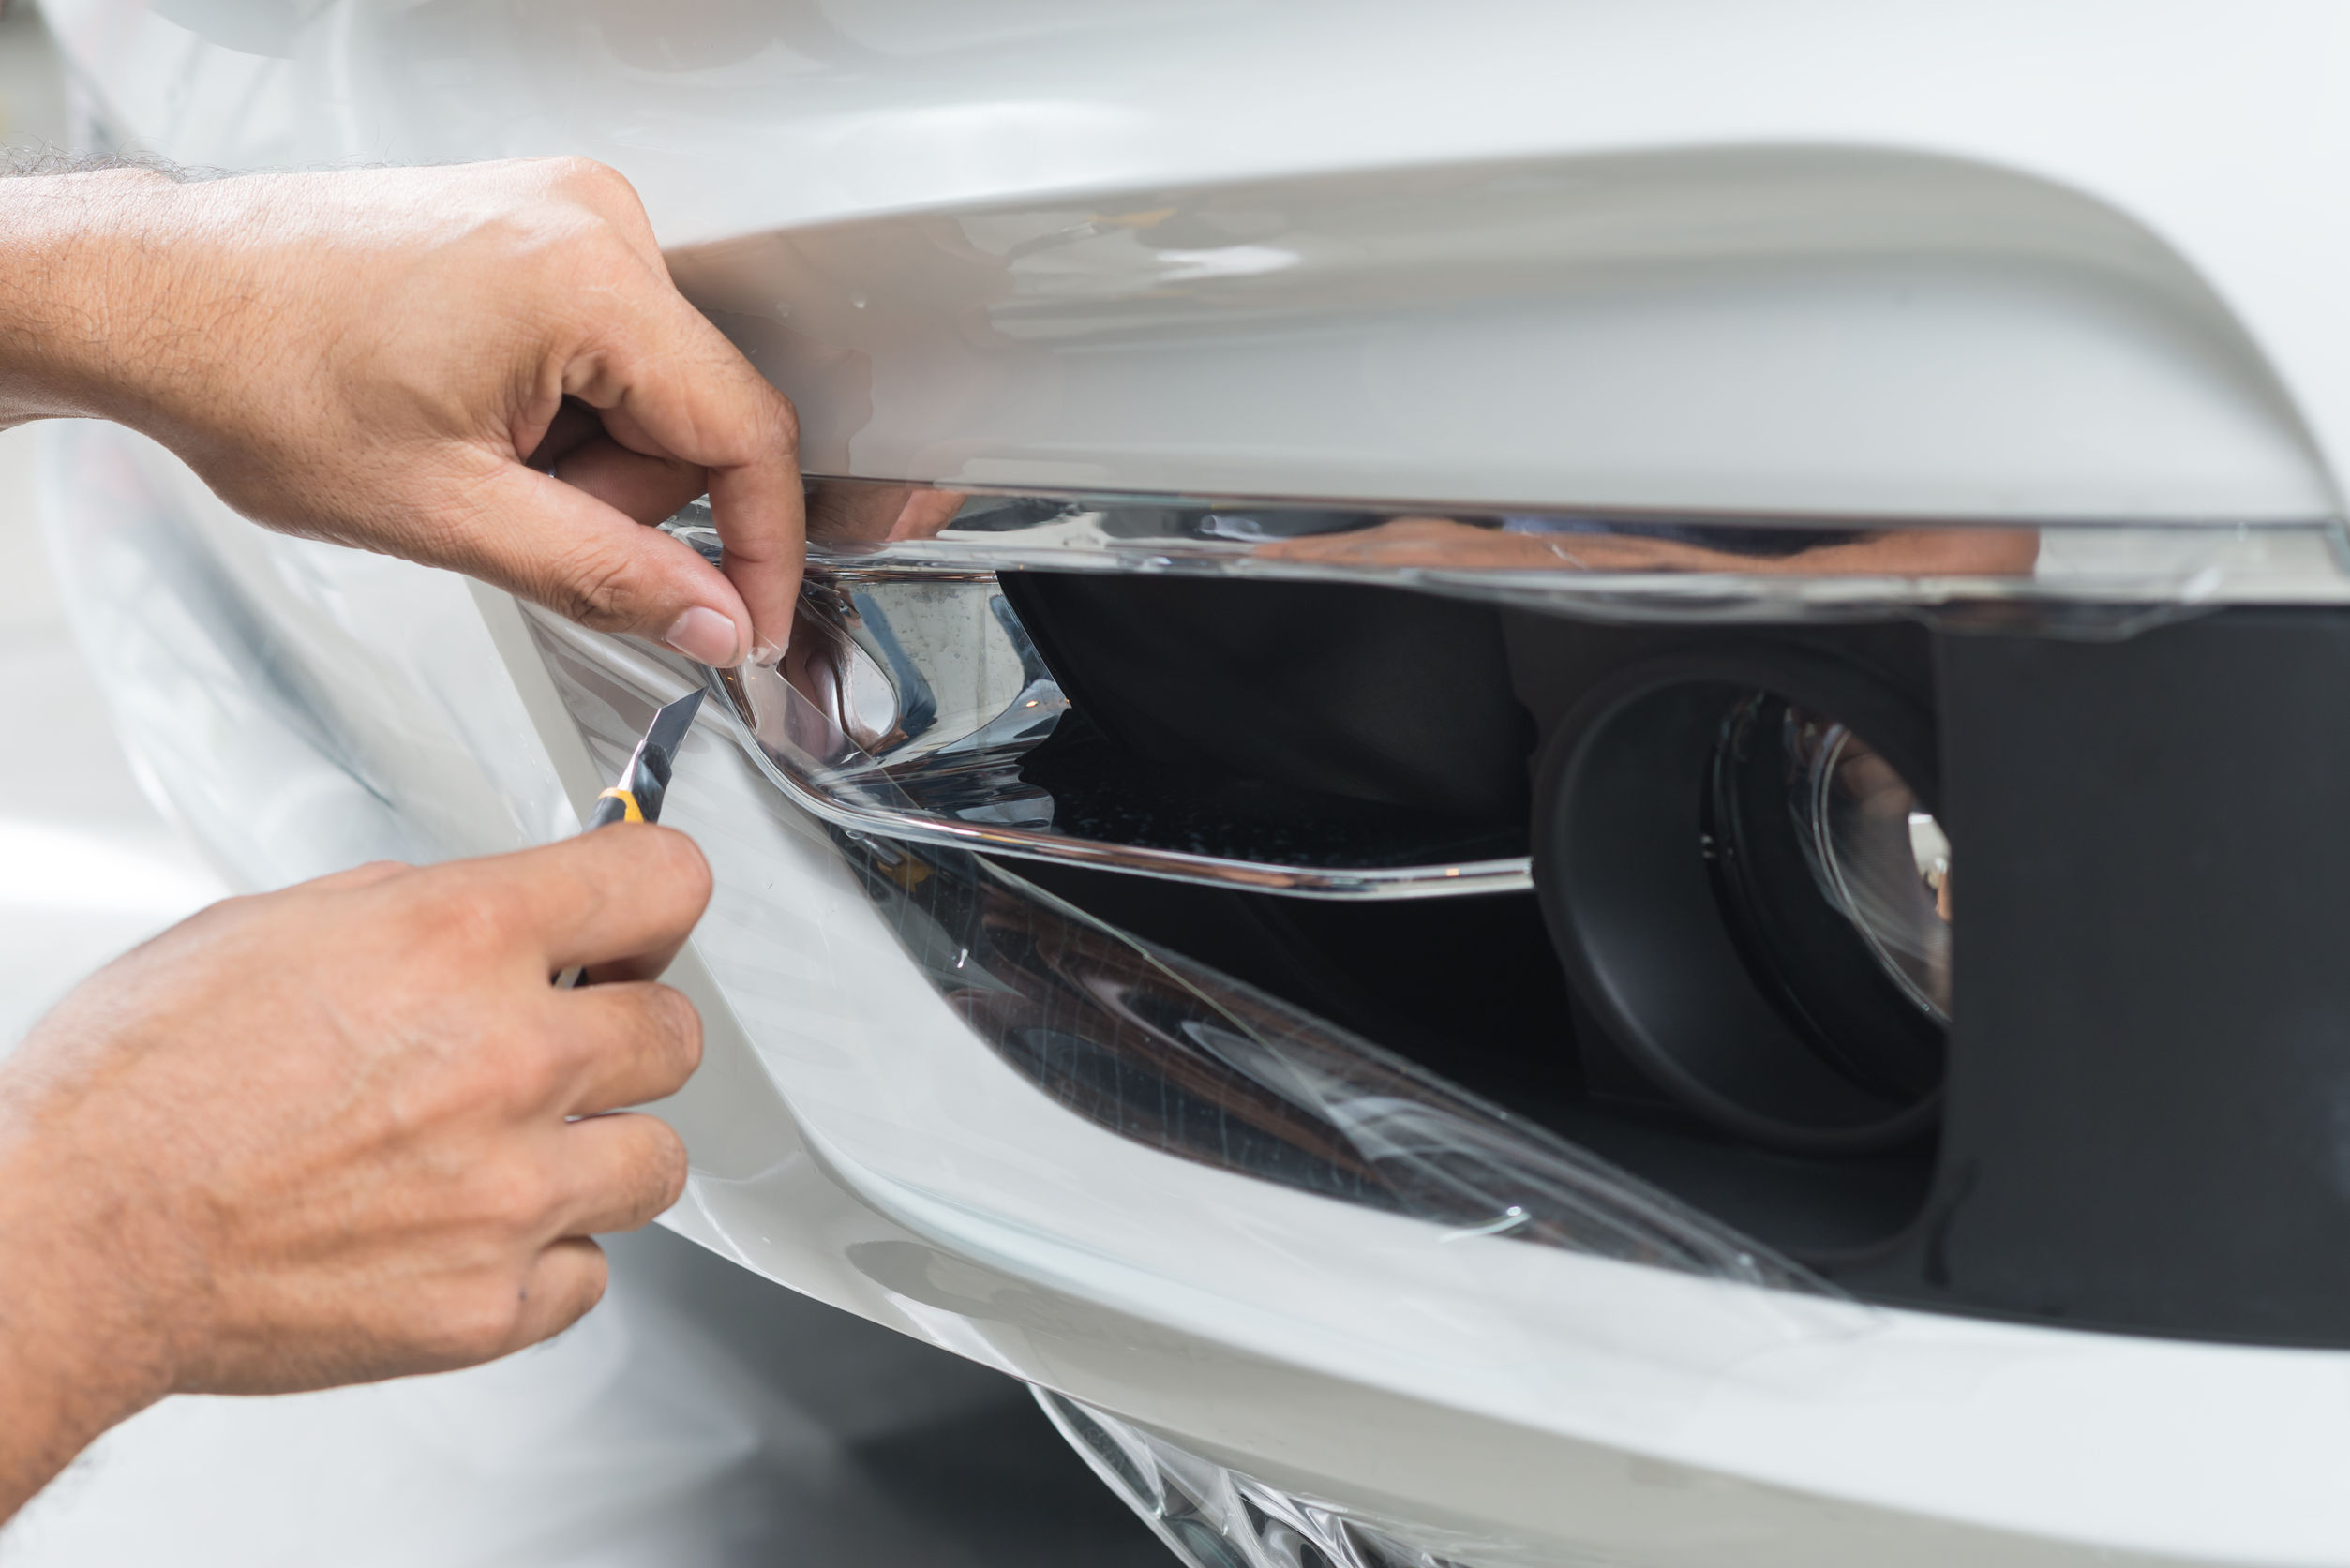 56485866 - paint protection film series : cutting paint protection film on white car